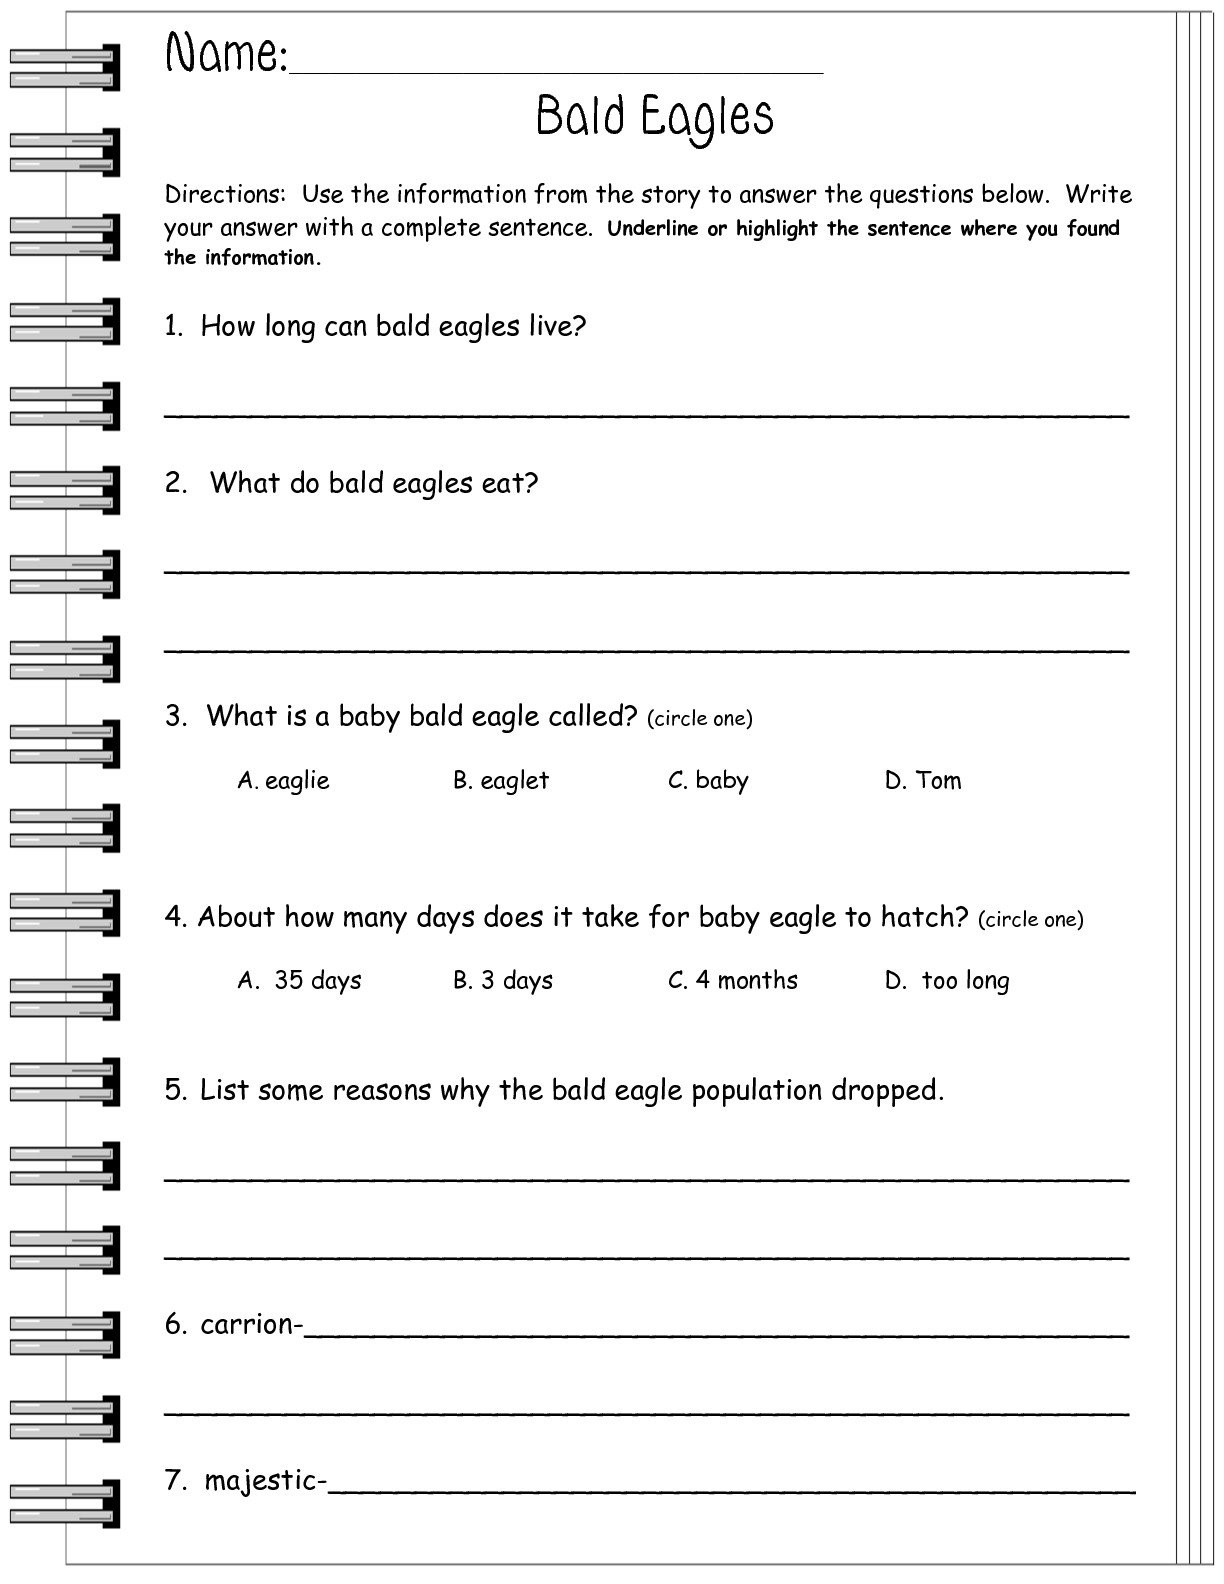 Informational Text Worksheets And Printouts From The Teacher's Guide Together With Informational Text Worksheets